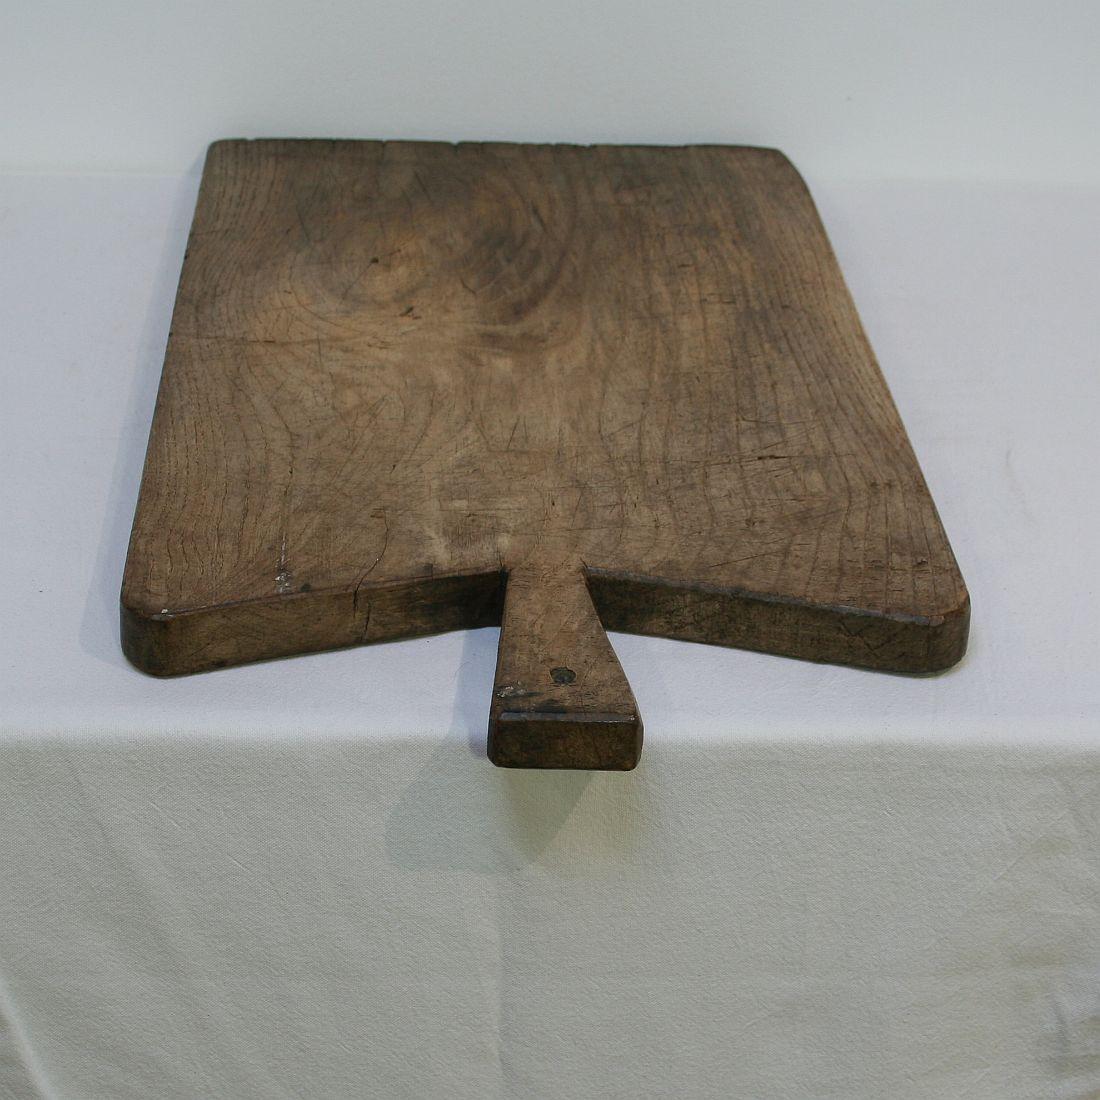 Collection of Three Rare French 19th Century, Wooden Chopping or Cutting Boards 3